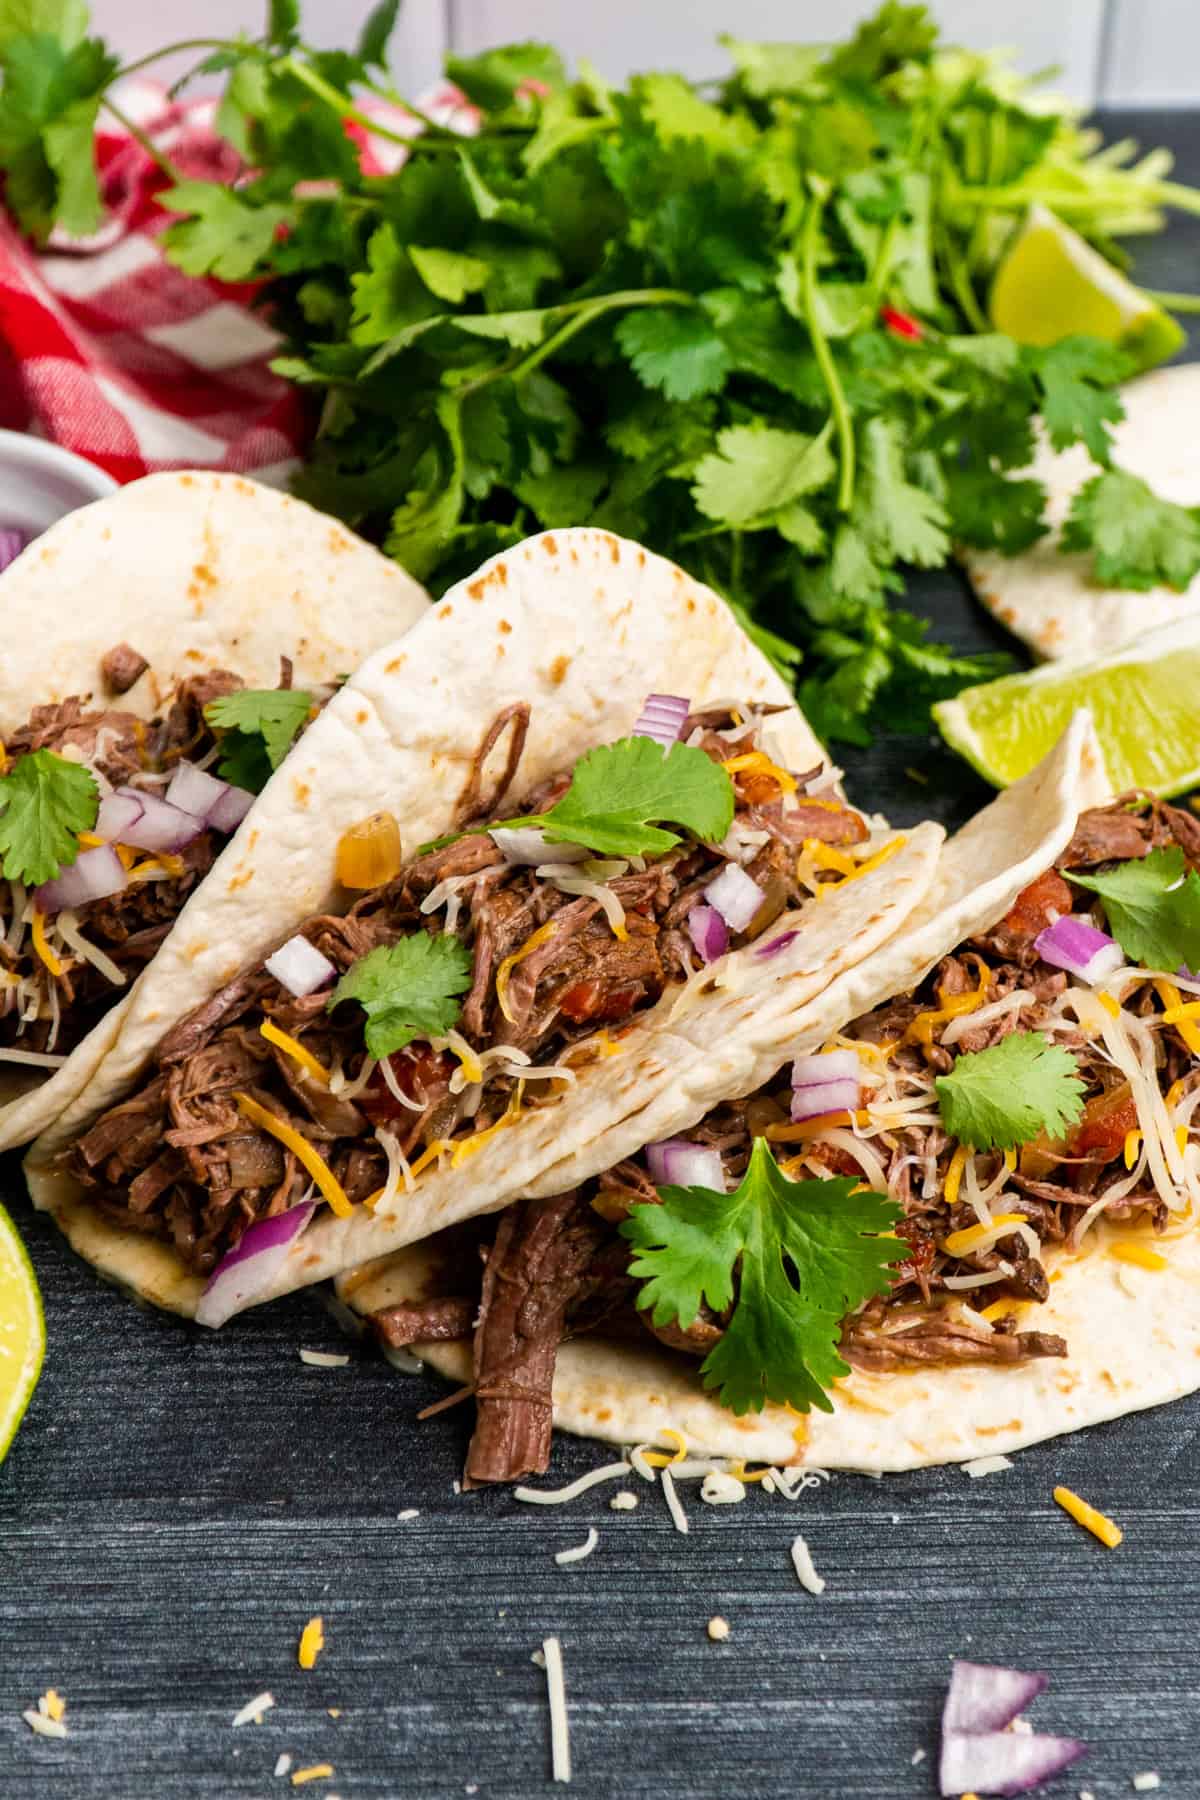 Crock Pot shredded beef tacos in flour tortillas and garnished with onions and cilantro.